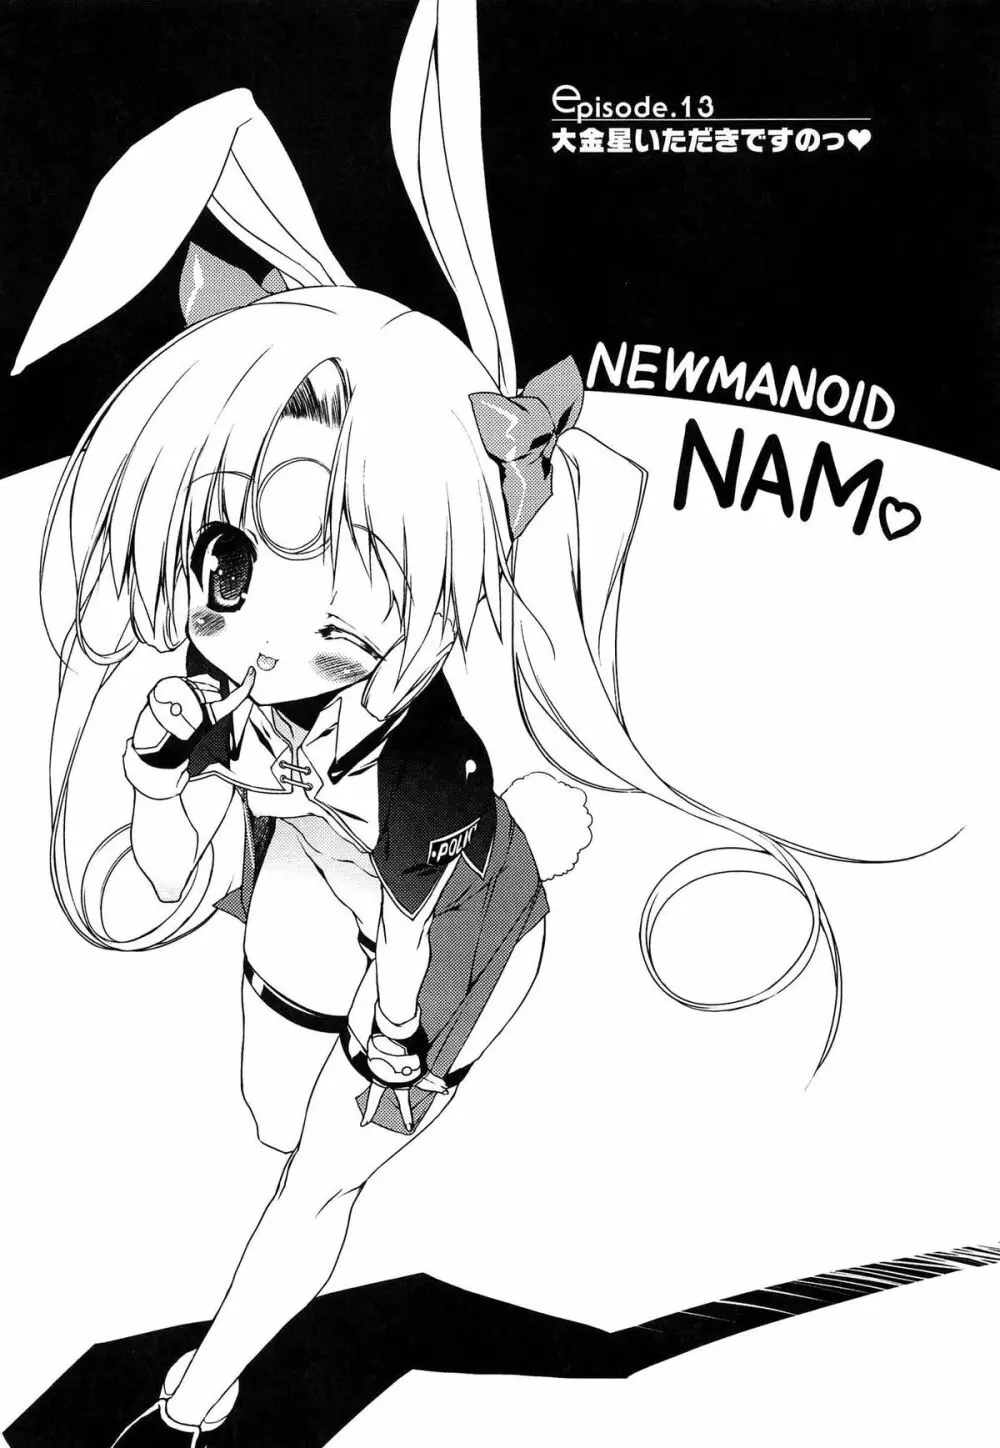 Newmanoid CAM Vol.2 初回限定版 -The Making of Newmanoid CAM- 59ページ